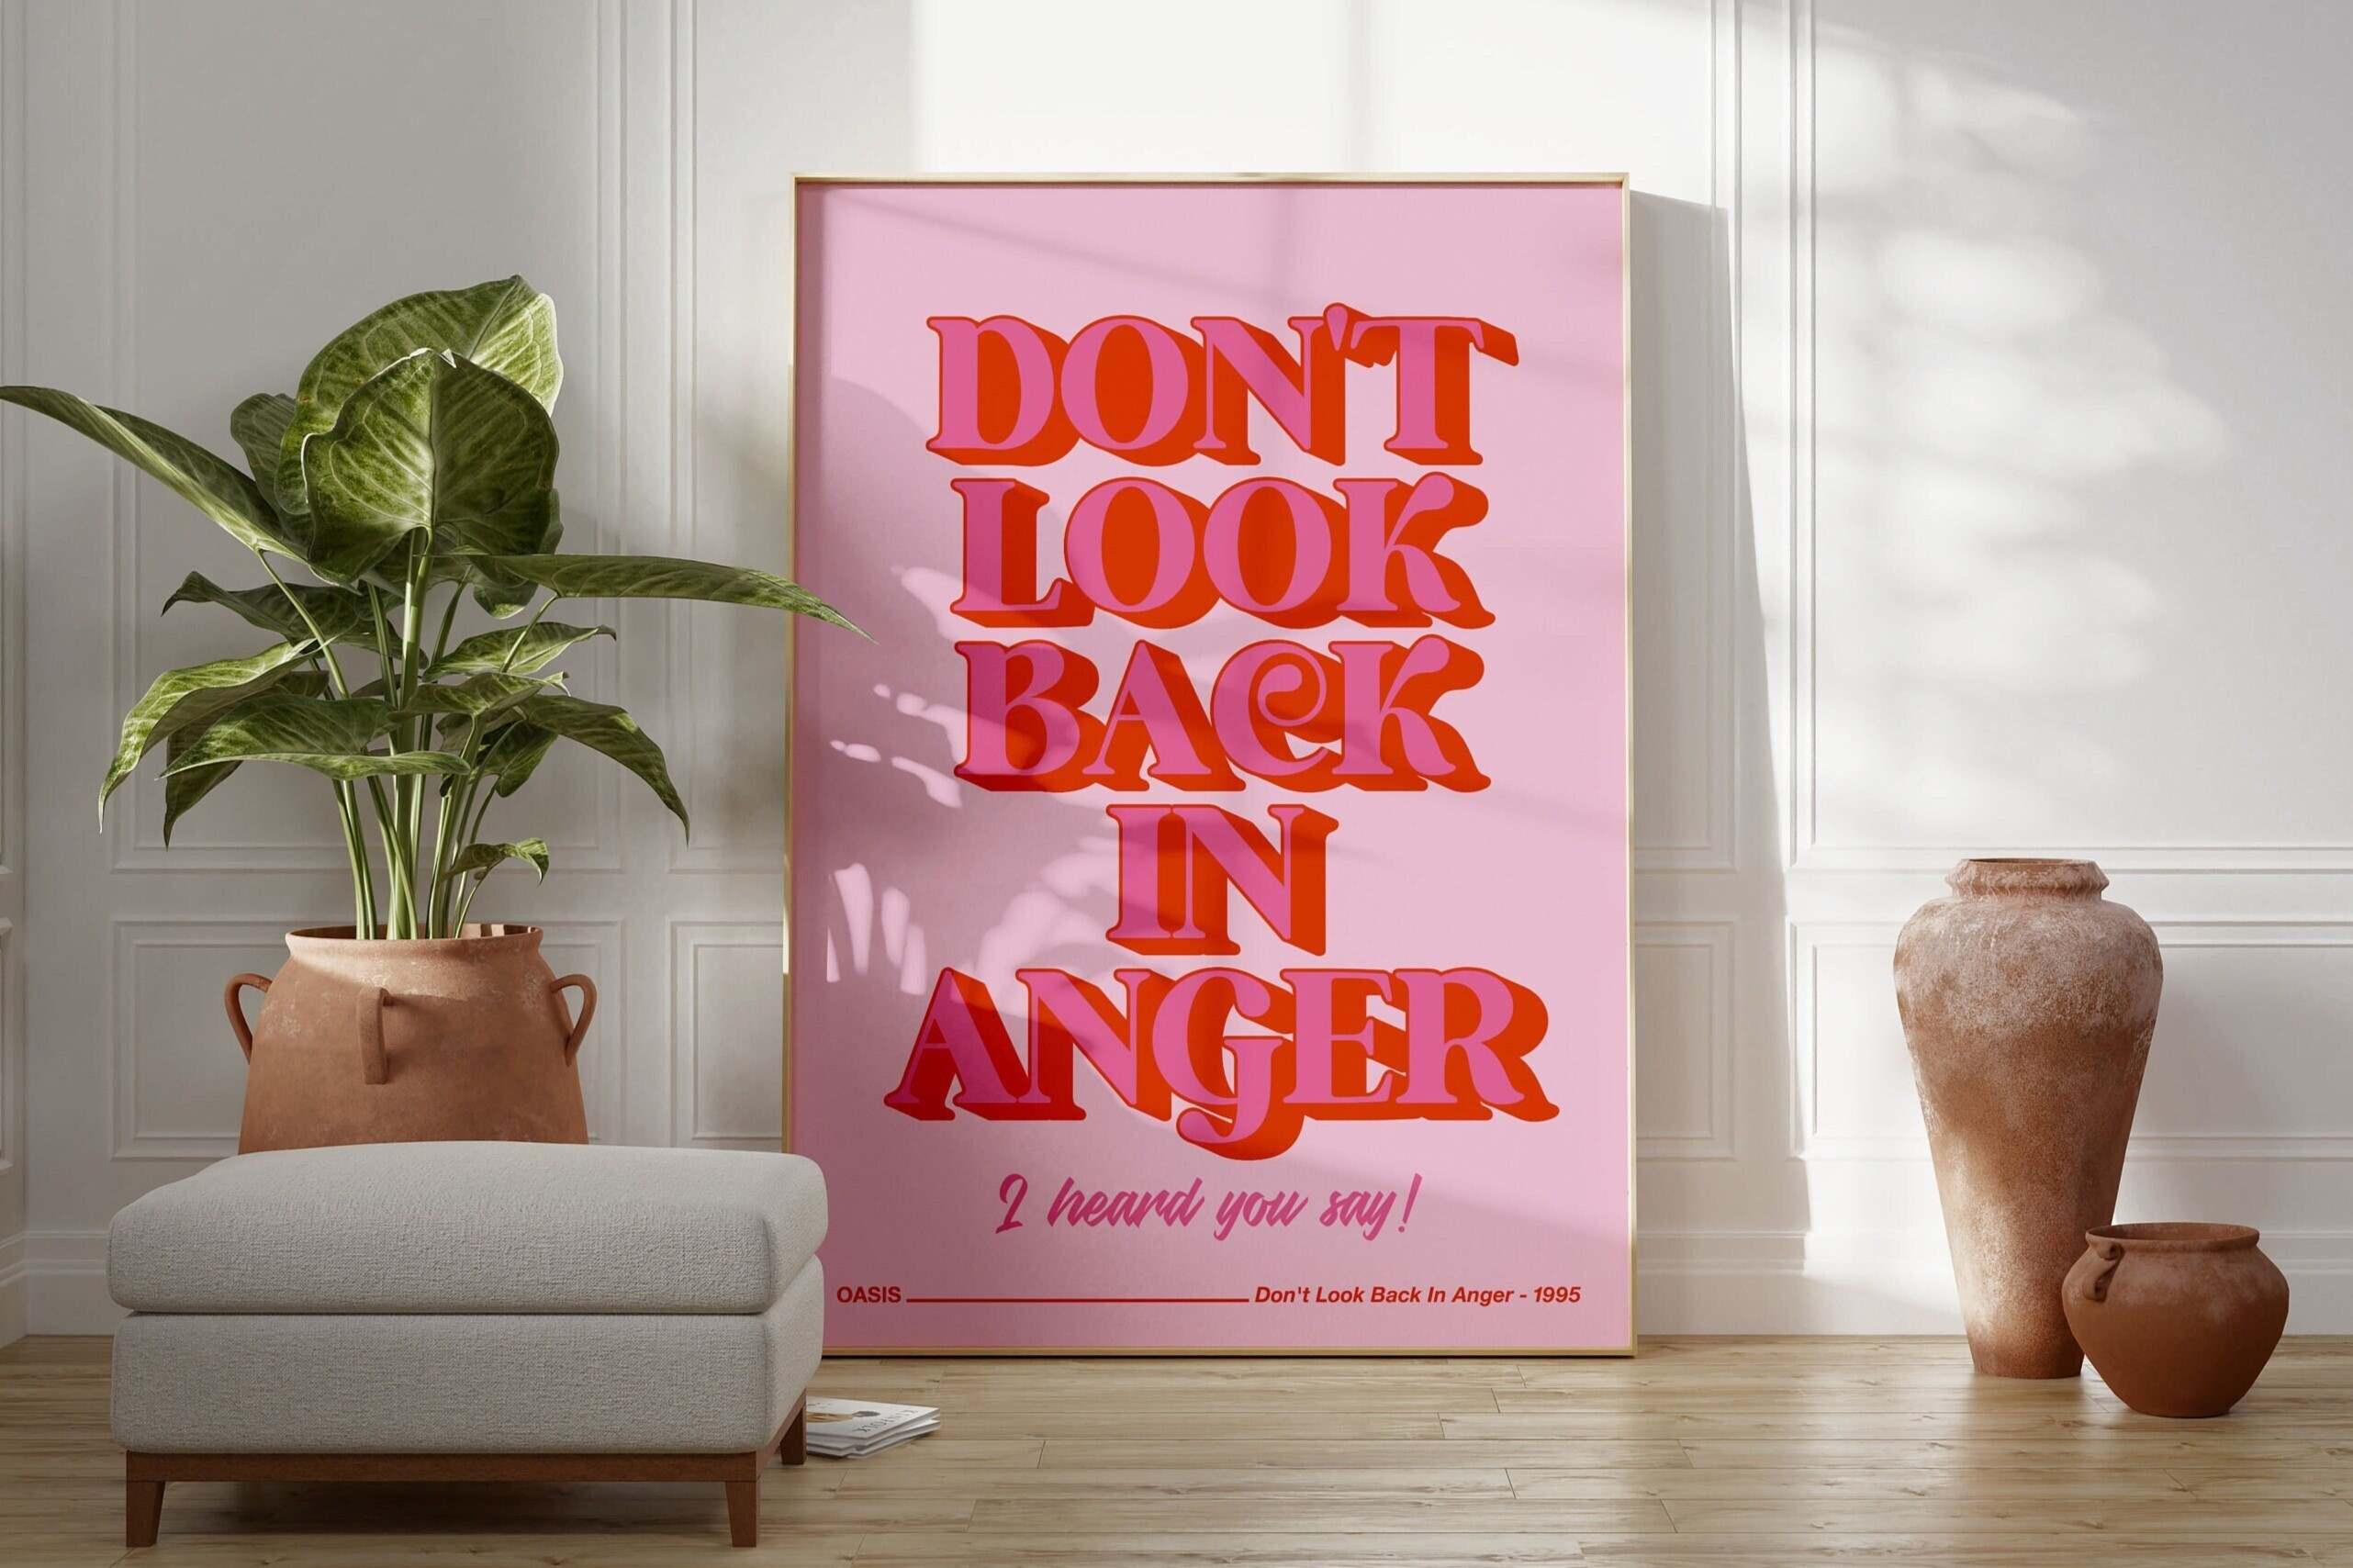 Unveiling The Hidden Message Behind Oasis’ “Don’t Look Back In Anger” Lyrics